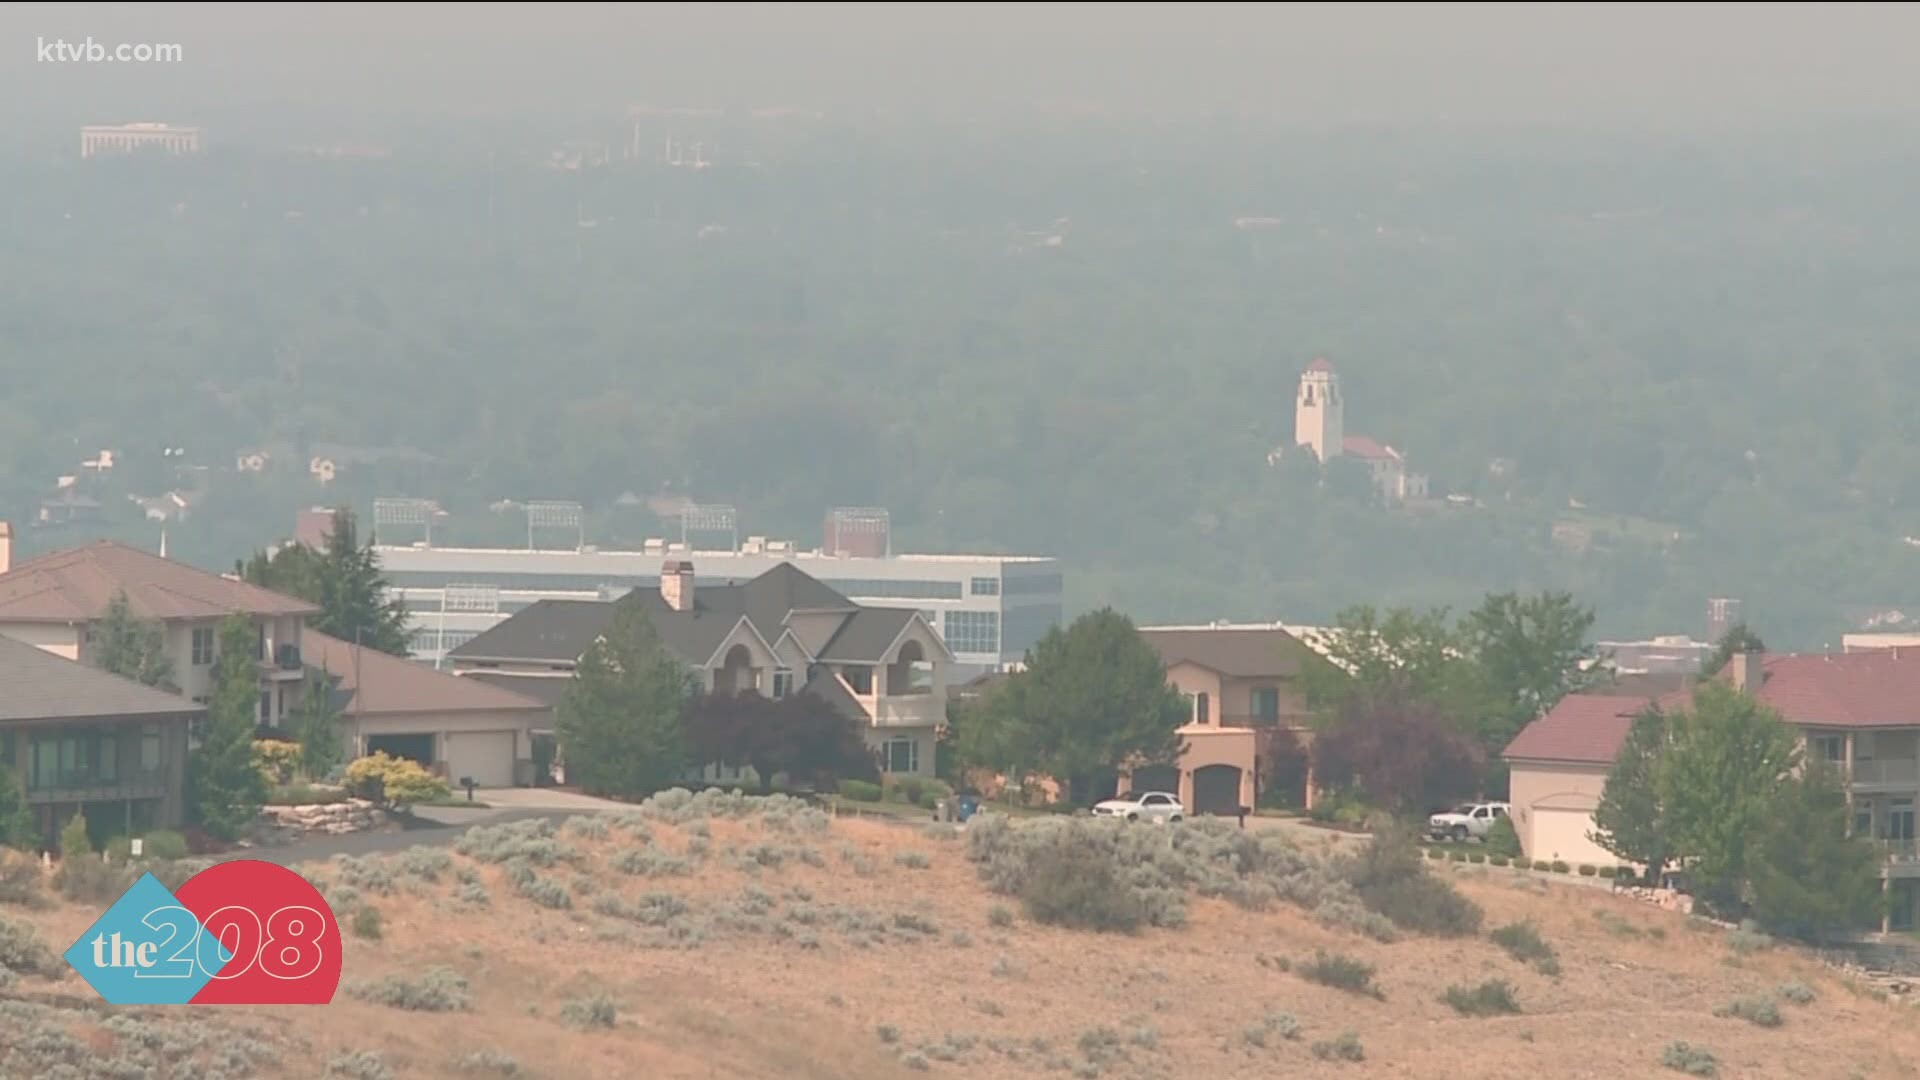 The Idaho Department of Environmental Quality believes it will be into the fall before the smoke begins to clear.